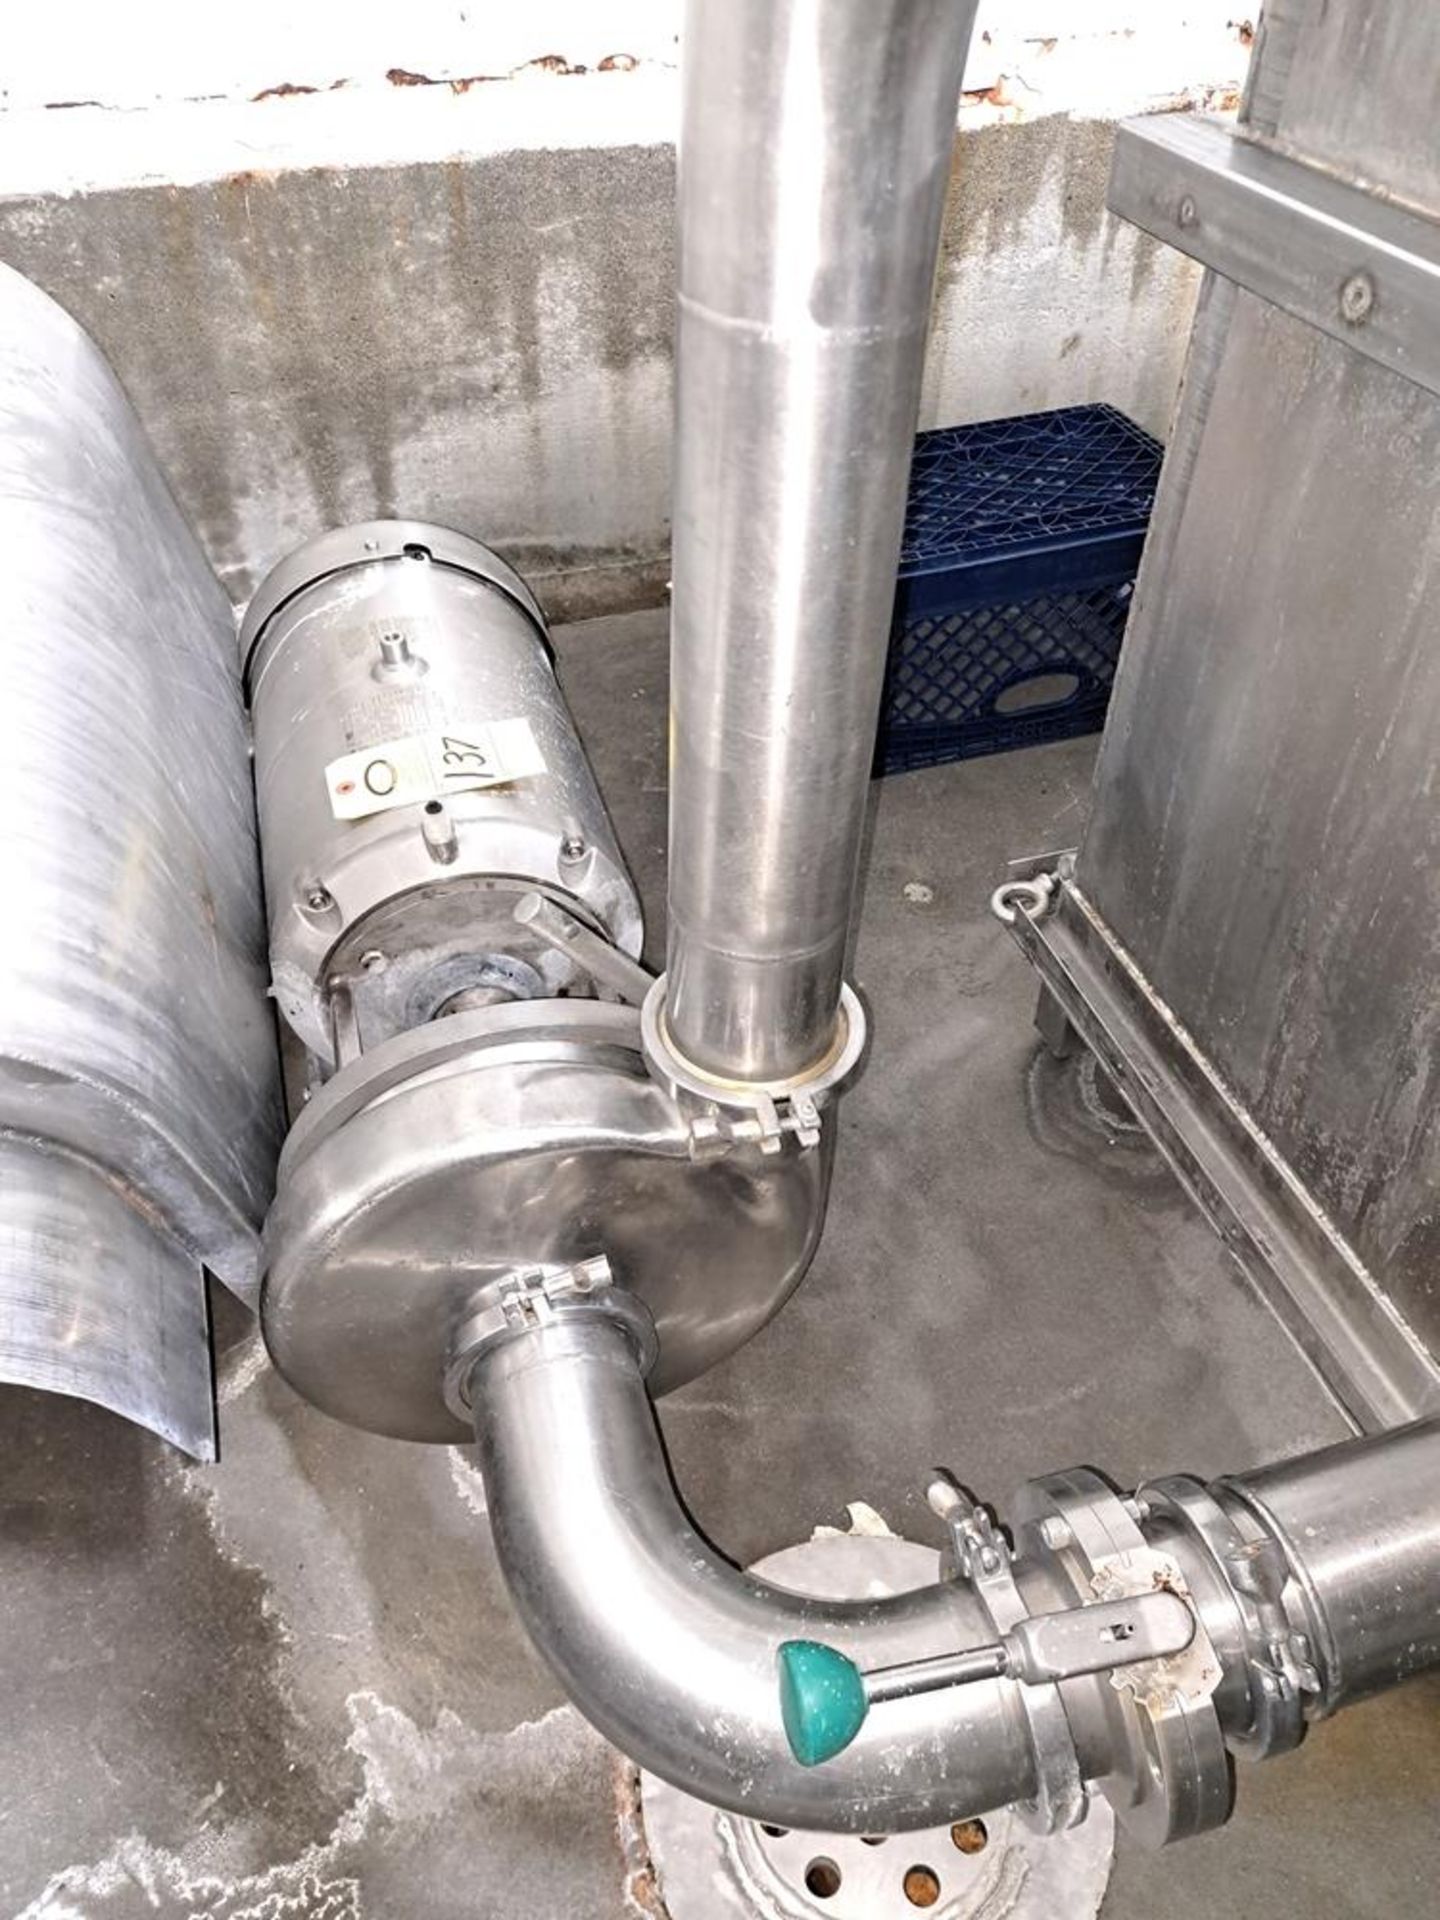 Stainless Steel Plate Chiller, 19 plates, 32 corrugations, (2) S.S. Stainless Steel Tanks, 4' W X 6' - Image 7 of 10